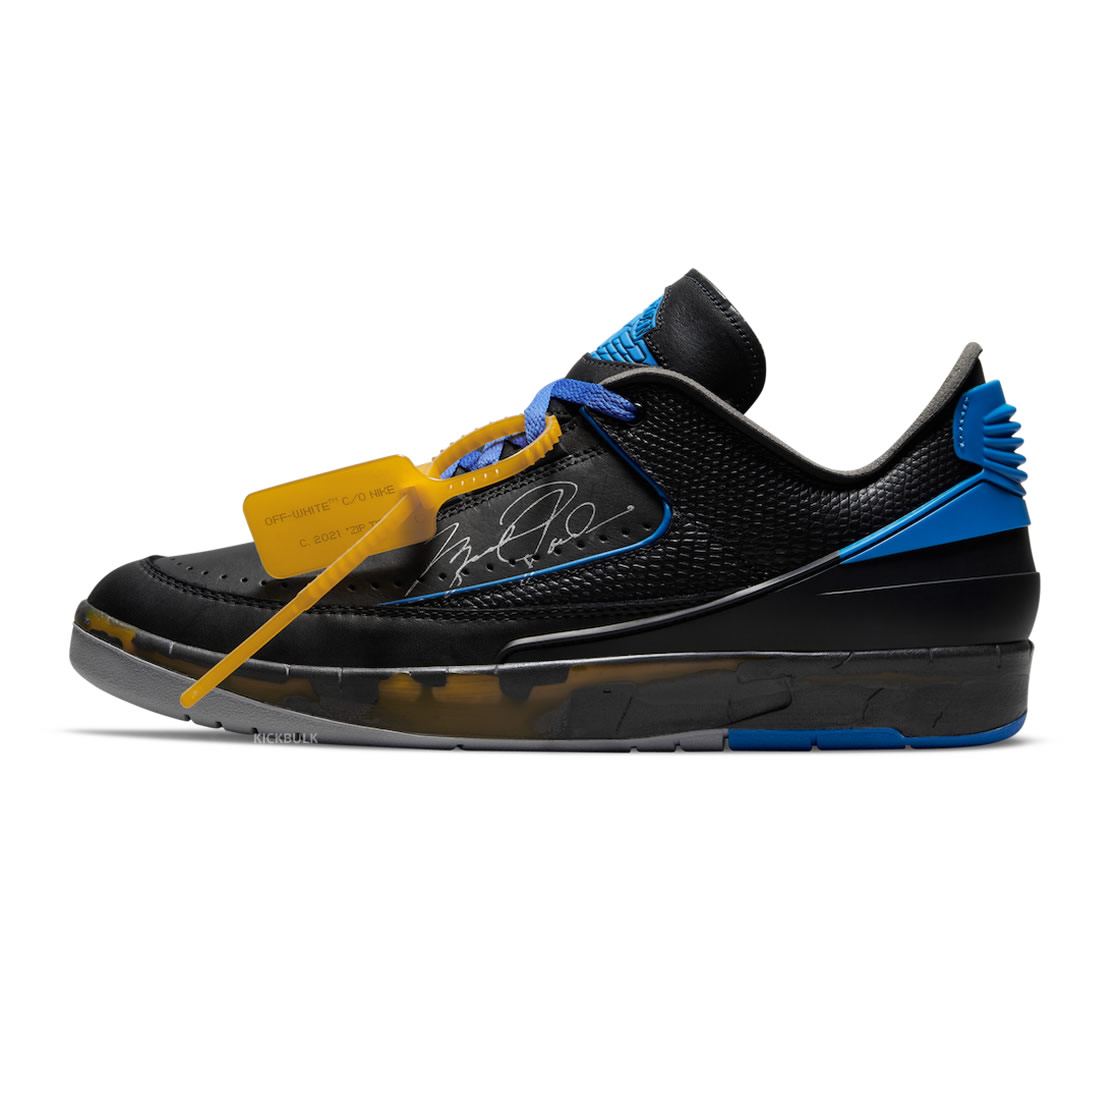 Off White The Jordan 5 Low Chinese New Year Features a Hidden Layer Retro Low Sp Black Royal Dj4375 004 1 - www.kickbulk.co